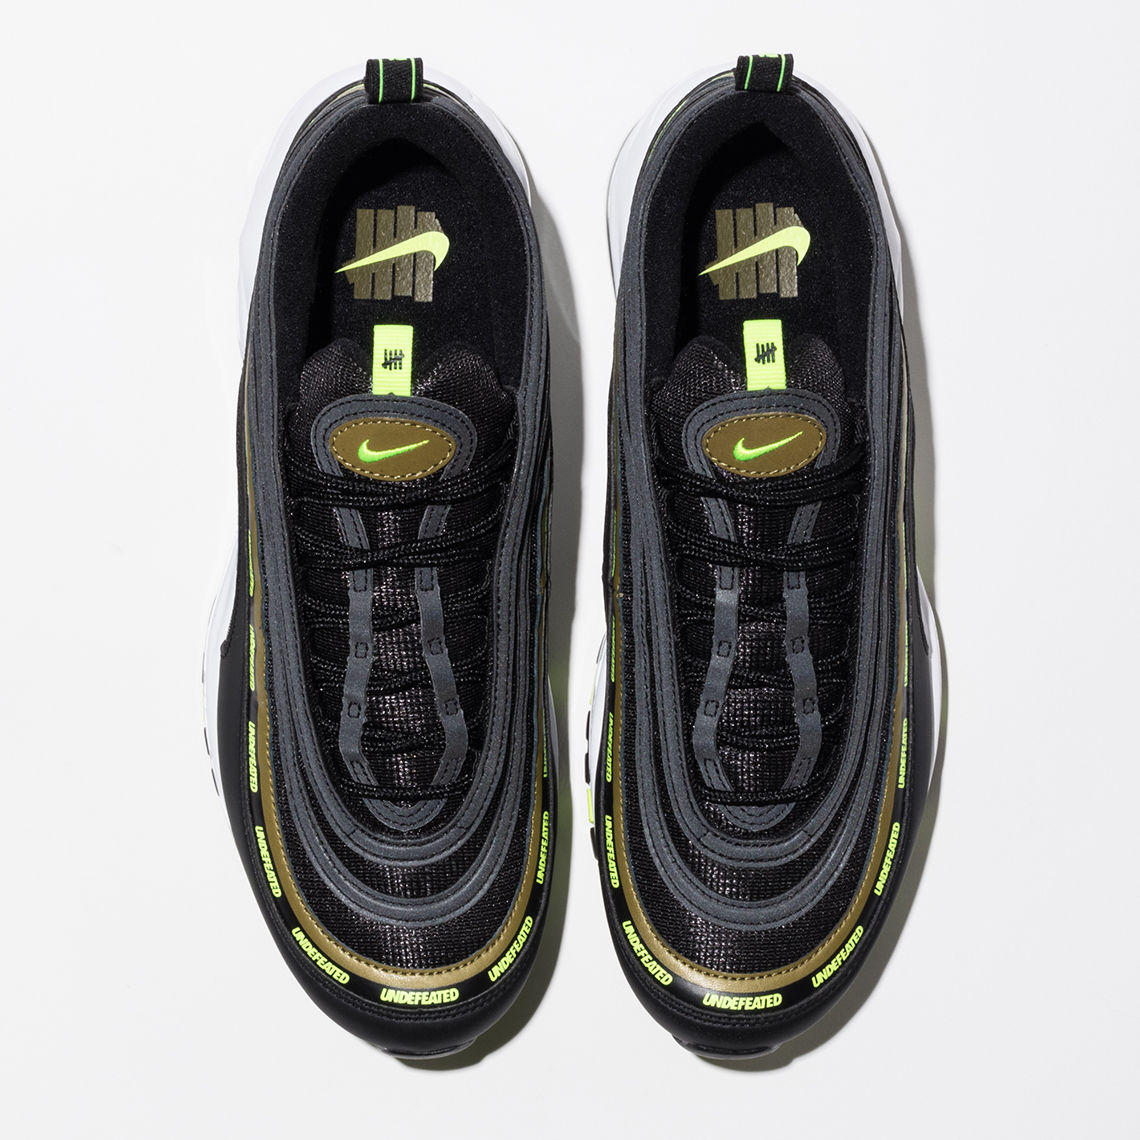 SOLECTION LV Undefeated x Nike Air Max 97 OG %article_desc% Source: Sneaker  NewsUNDEFEATED X NIKE AIR MAX 97 OGRELEASE DATE: September 2017 Color:  Black/Gorge Green/White-Speed Red Style Code: AJ1986-001 air max, black